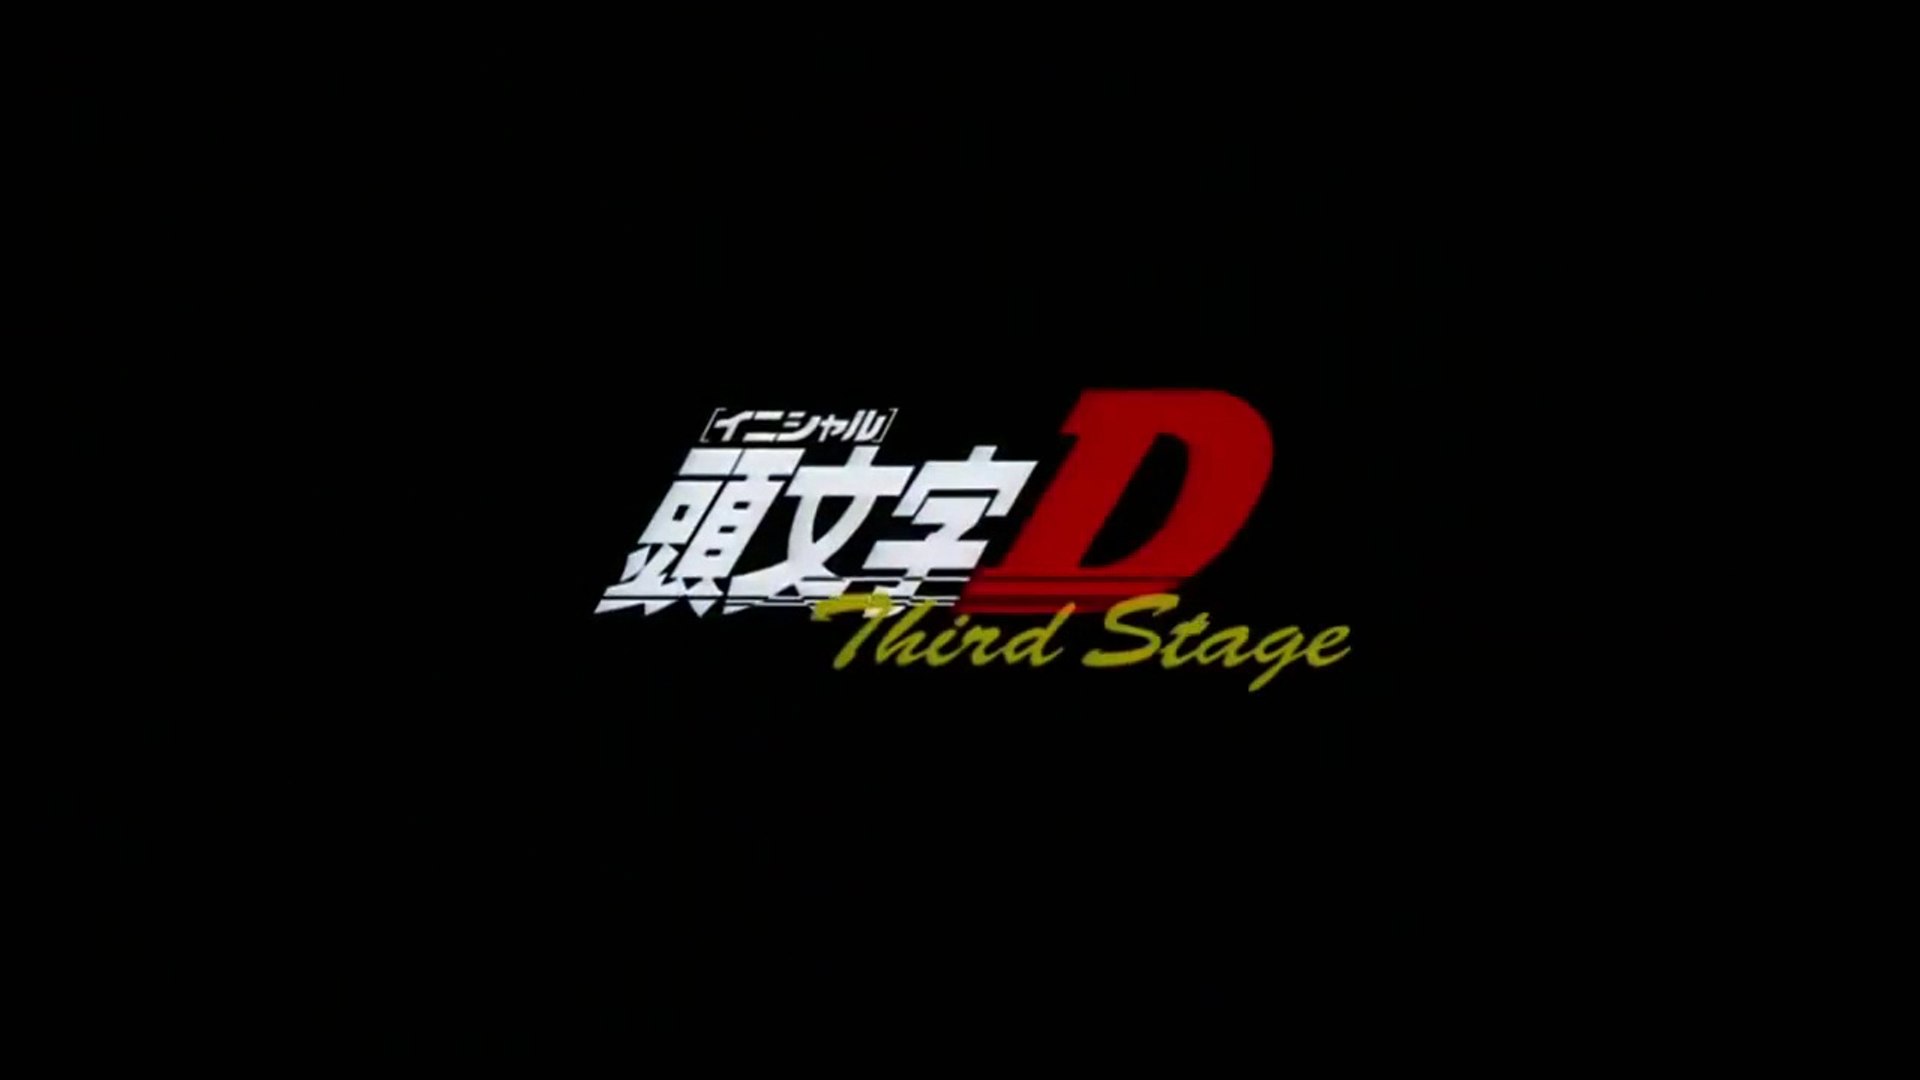 Initial D 3rd Stage - streaming - VOSTFR et VF - ADN